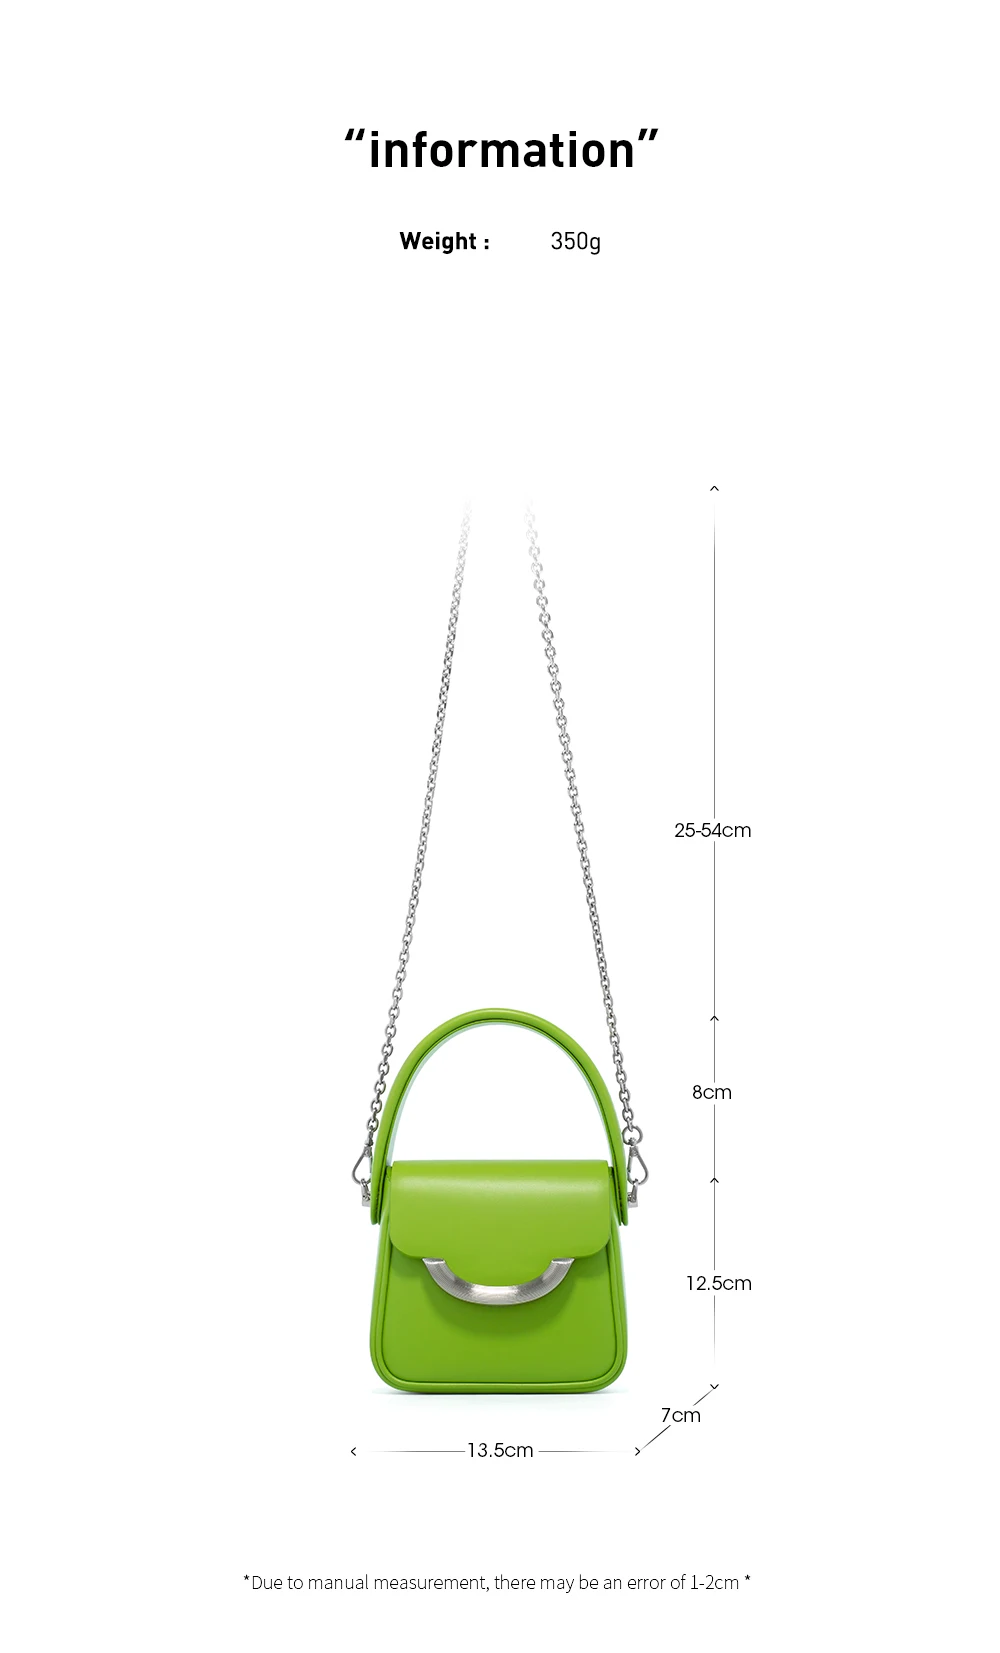 Clever and delicate messenger handbag multi-color leather bag -Sf494a8dbab084dbc83073d8ca10fb43ax